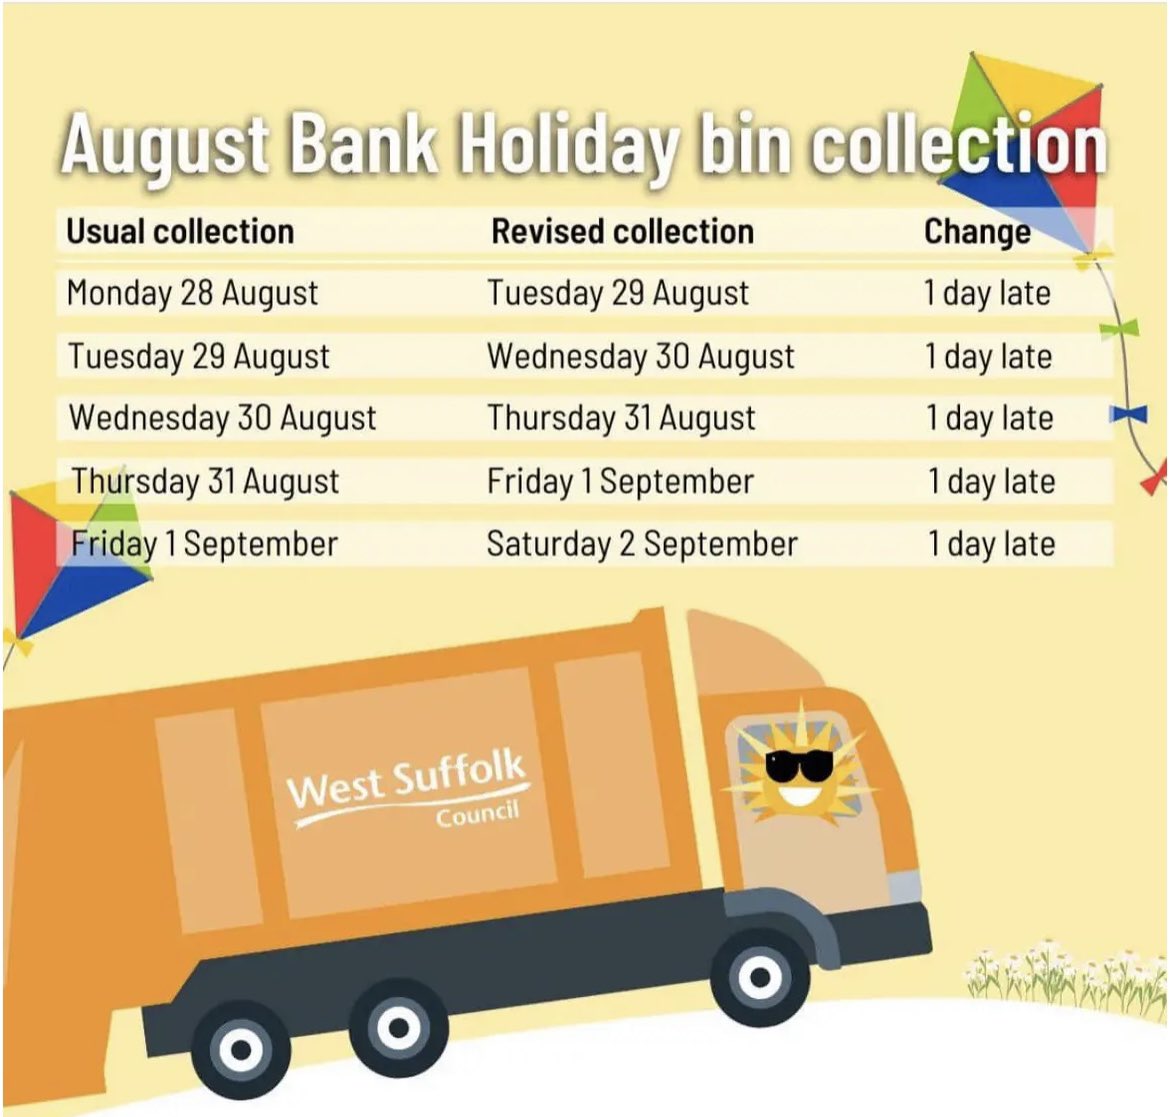 Just a reminder that the bins will be collected one day late this coming week @West_Suffolk